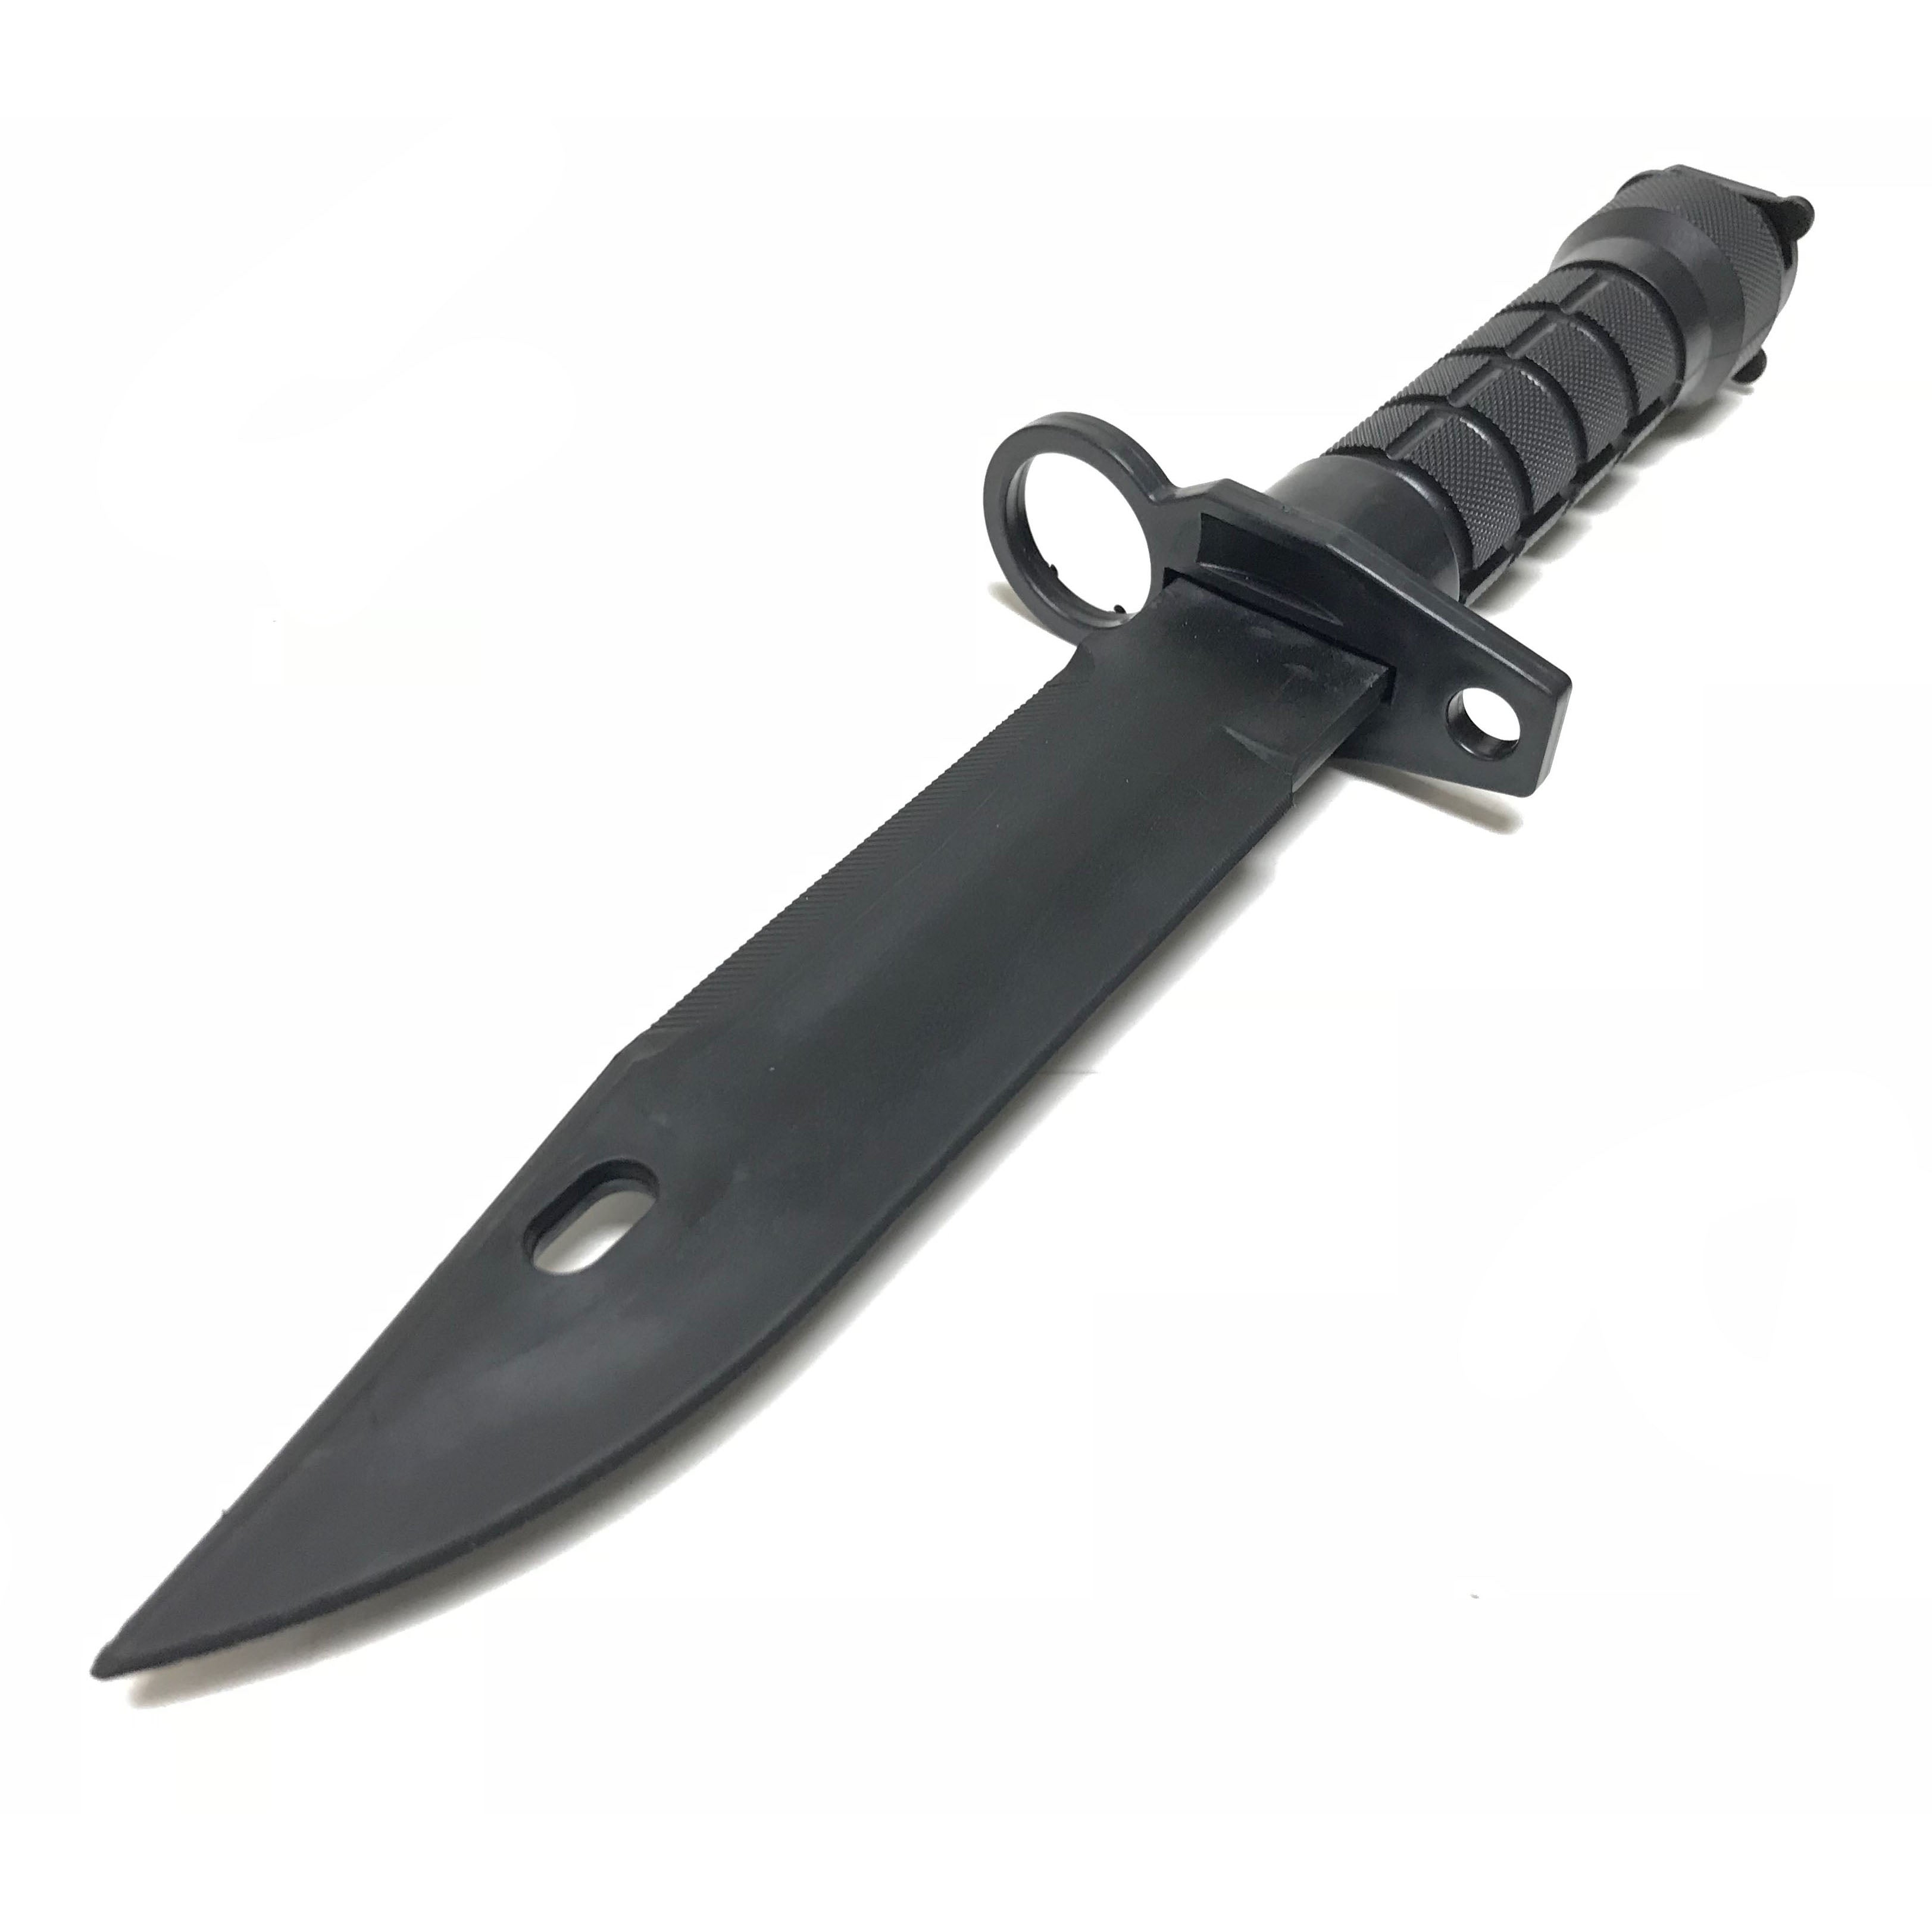 12 Inch Rubber Army M9 Tactical Bayonet Knife Black Stunt Prop with Sheath